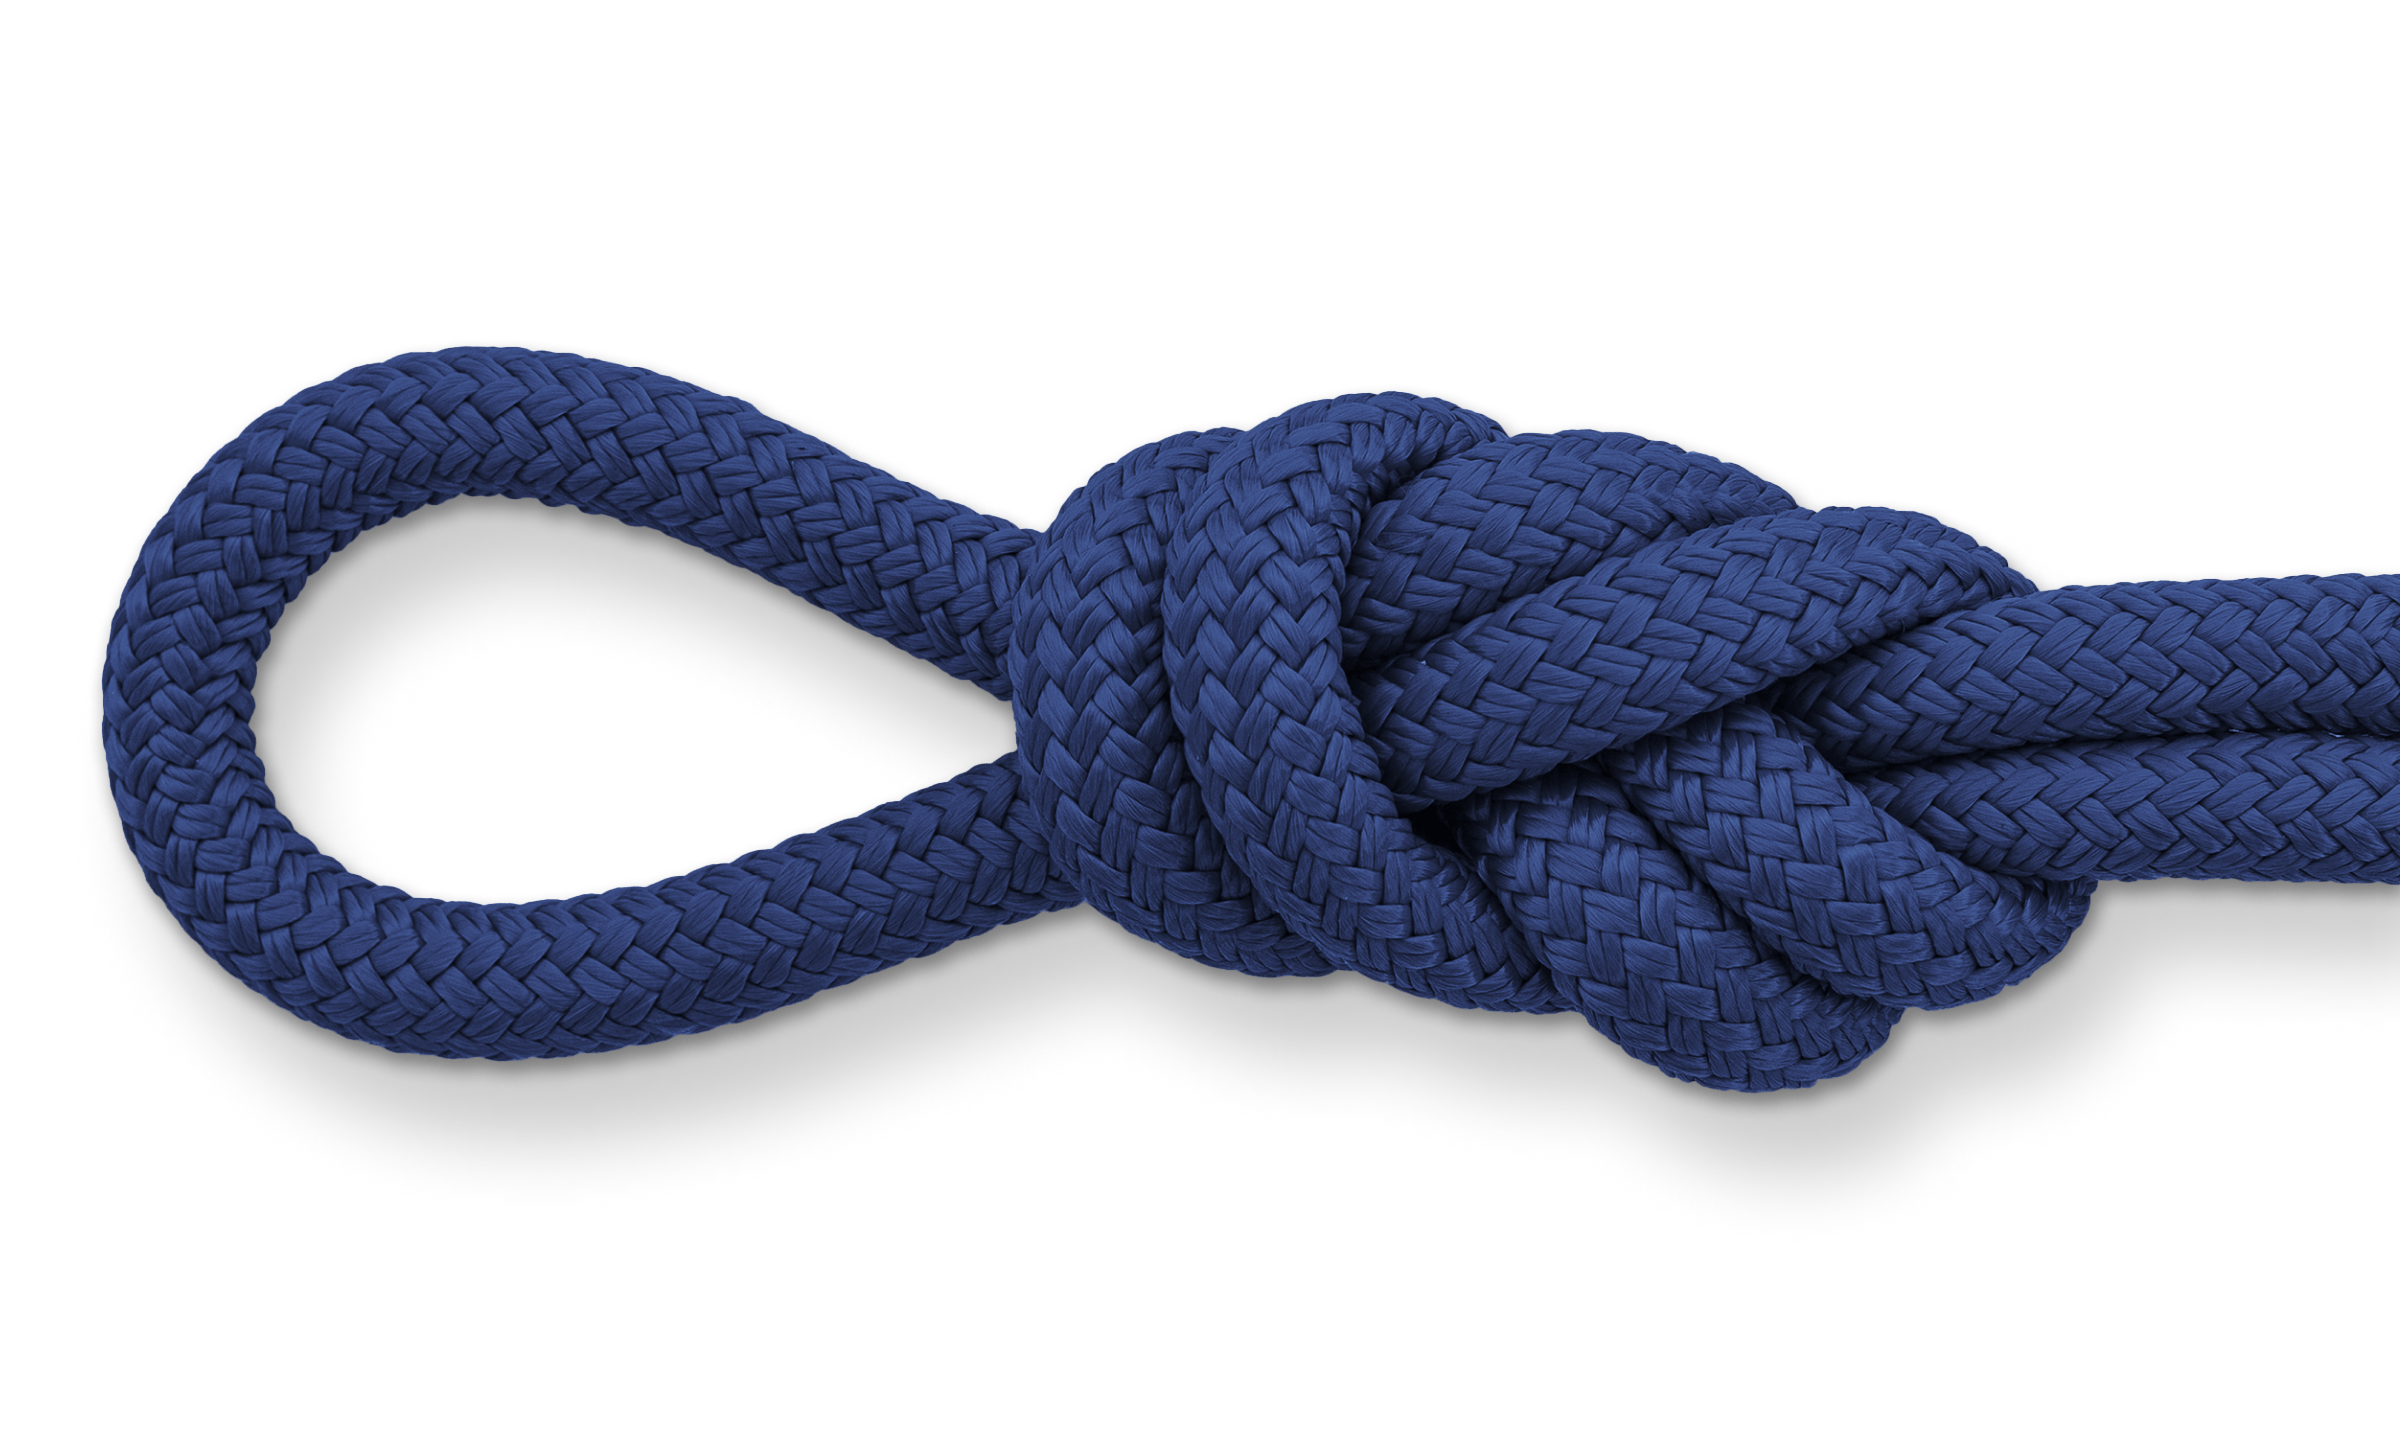 Non-Stretch, Solid and Durable nylon braided rope 